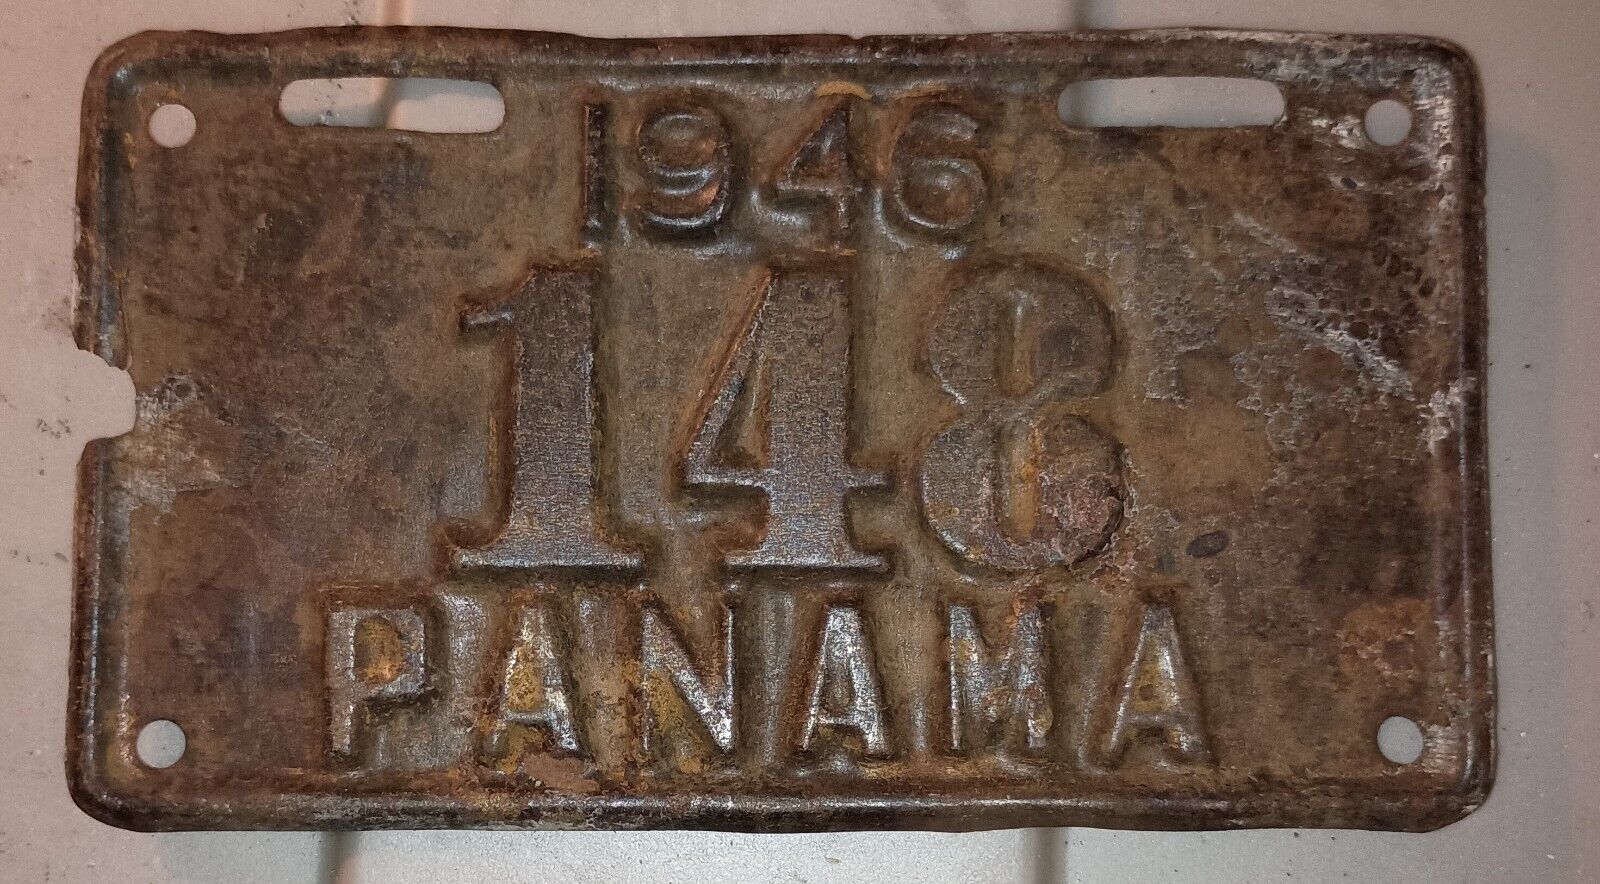 1946 Panama License Plate #148 Extremely Rare Find